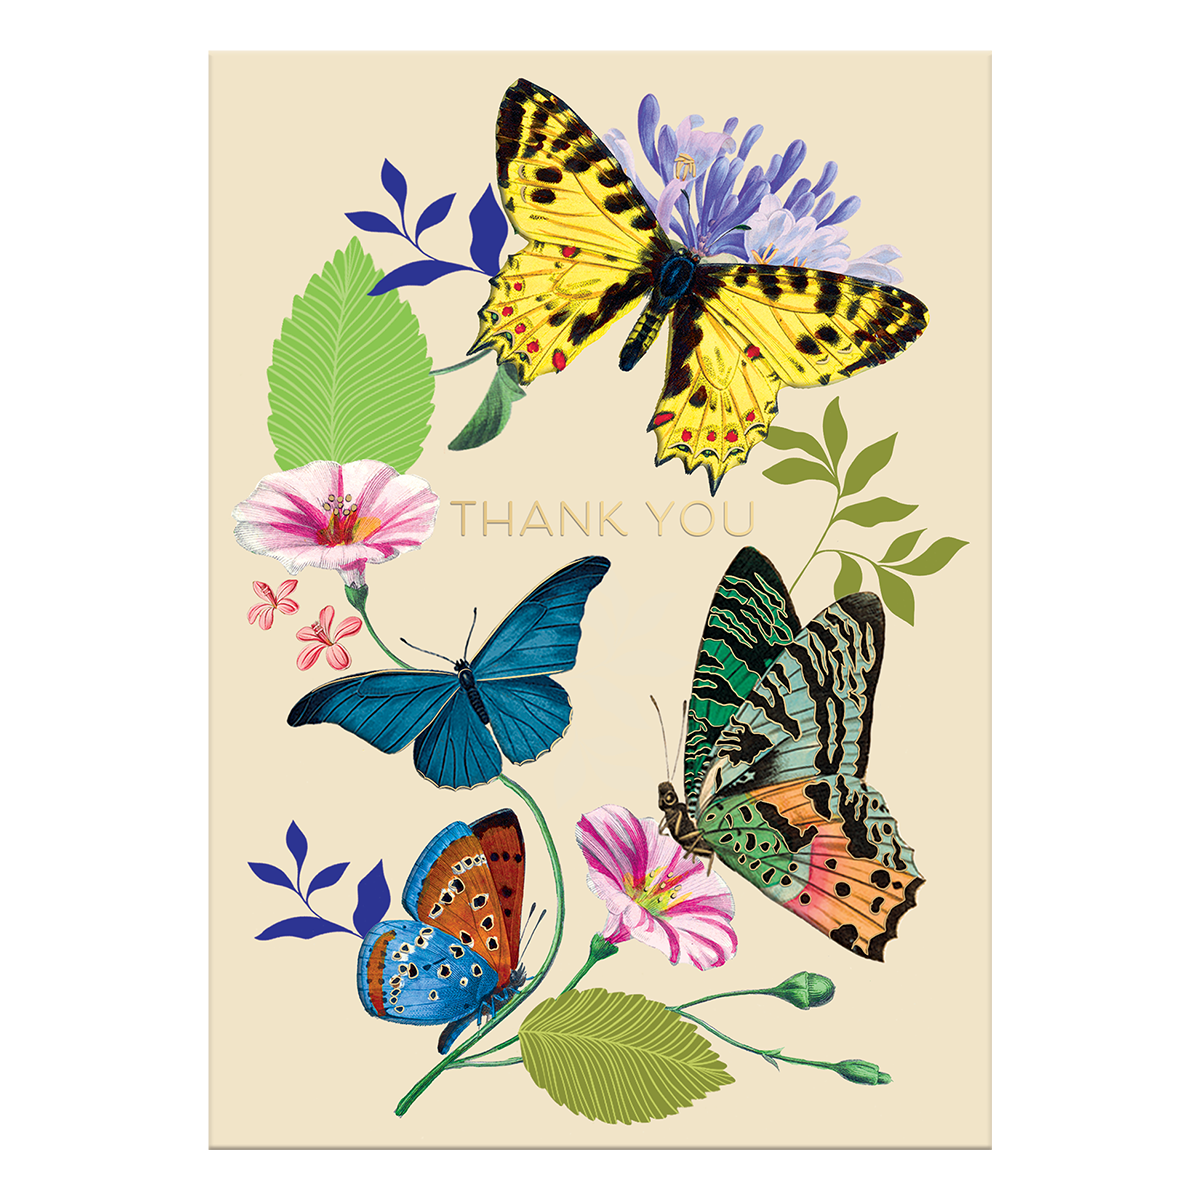 Vintage Floral Butterflies Greeting Card Product